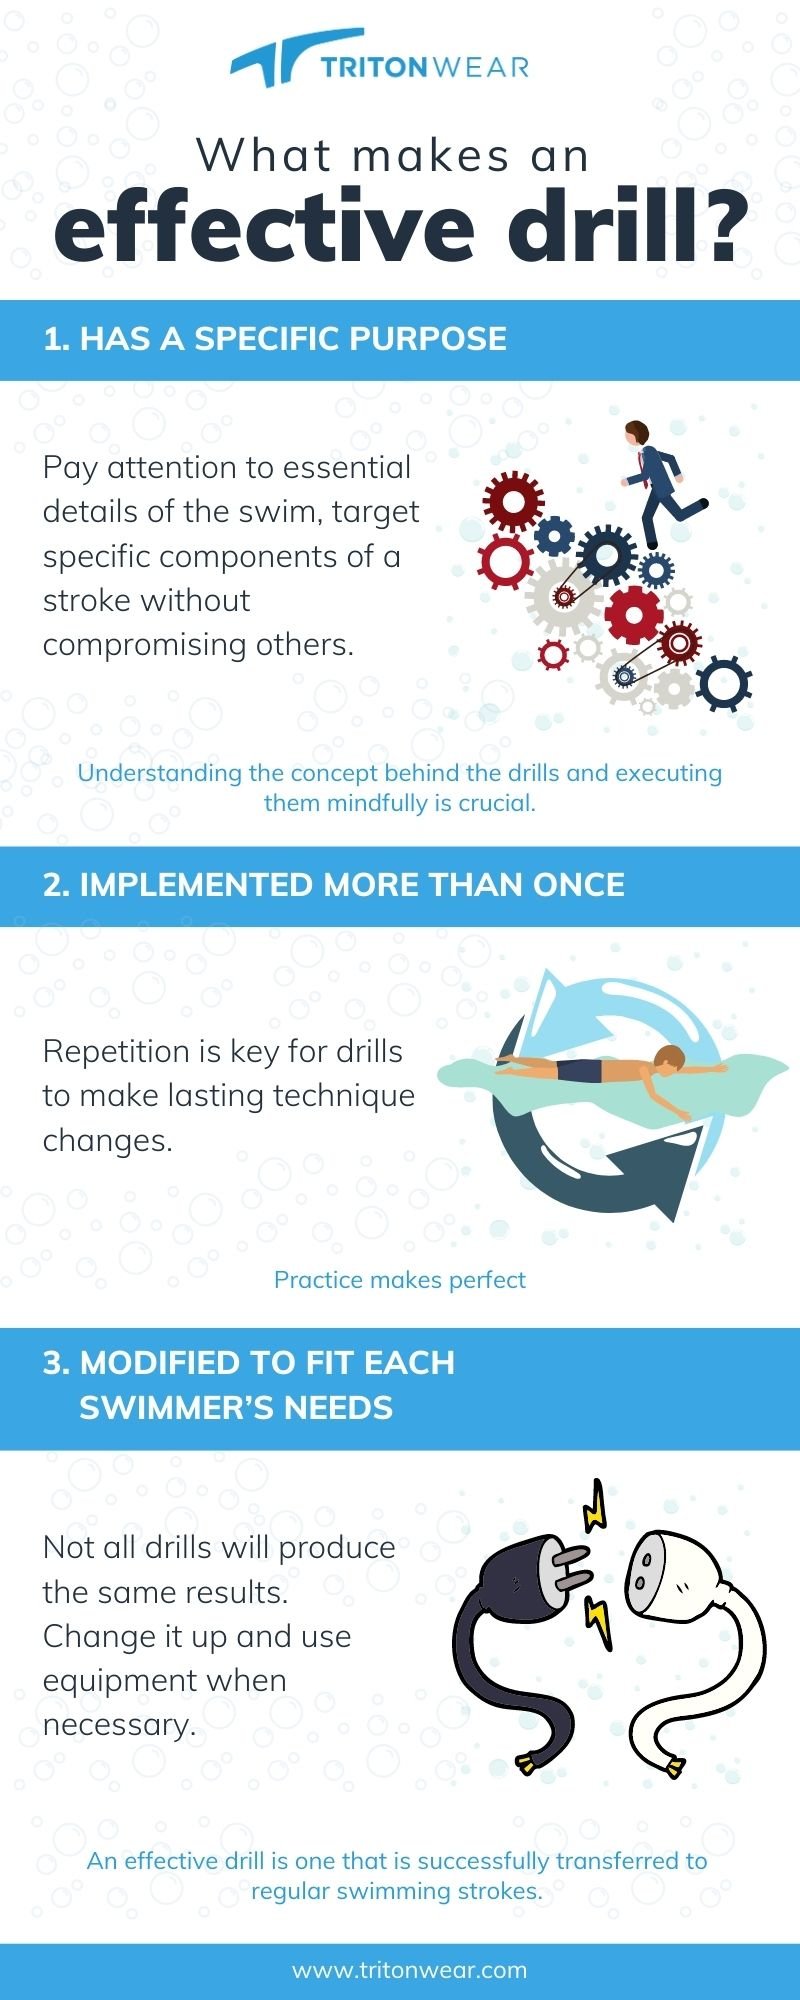 What Makes an Effective Drill infographic